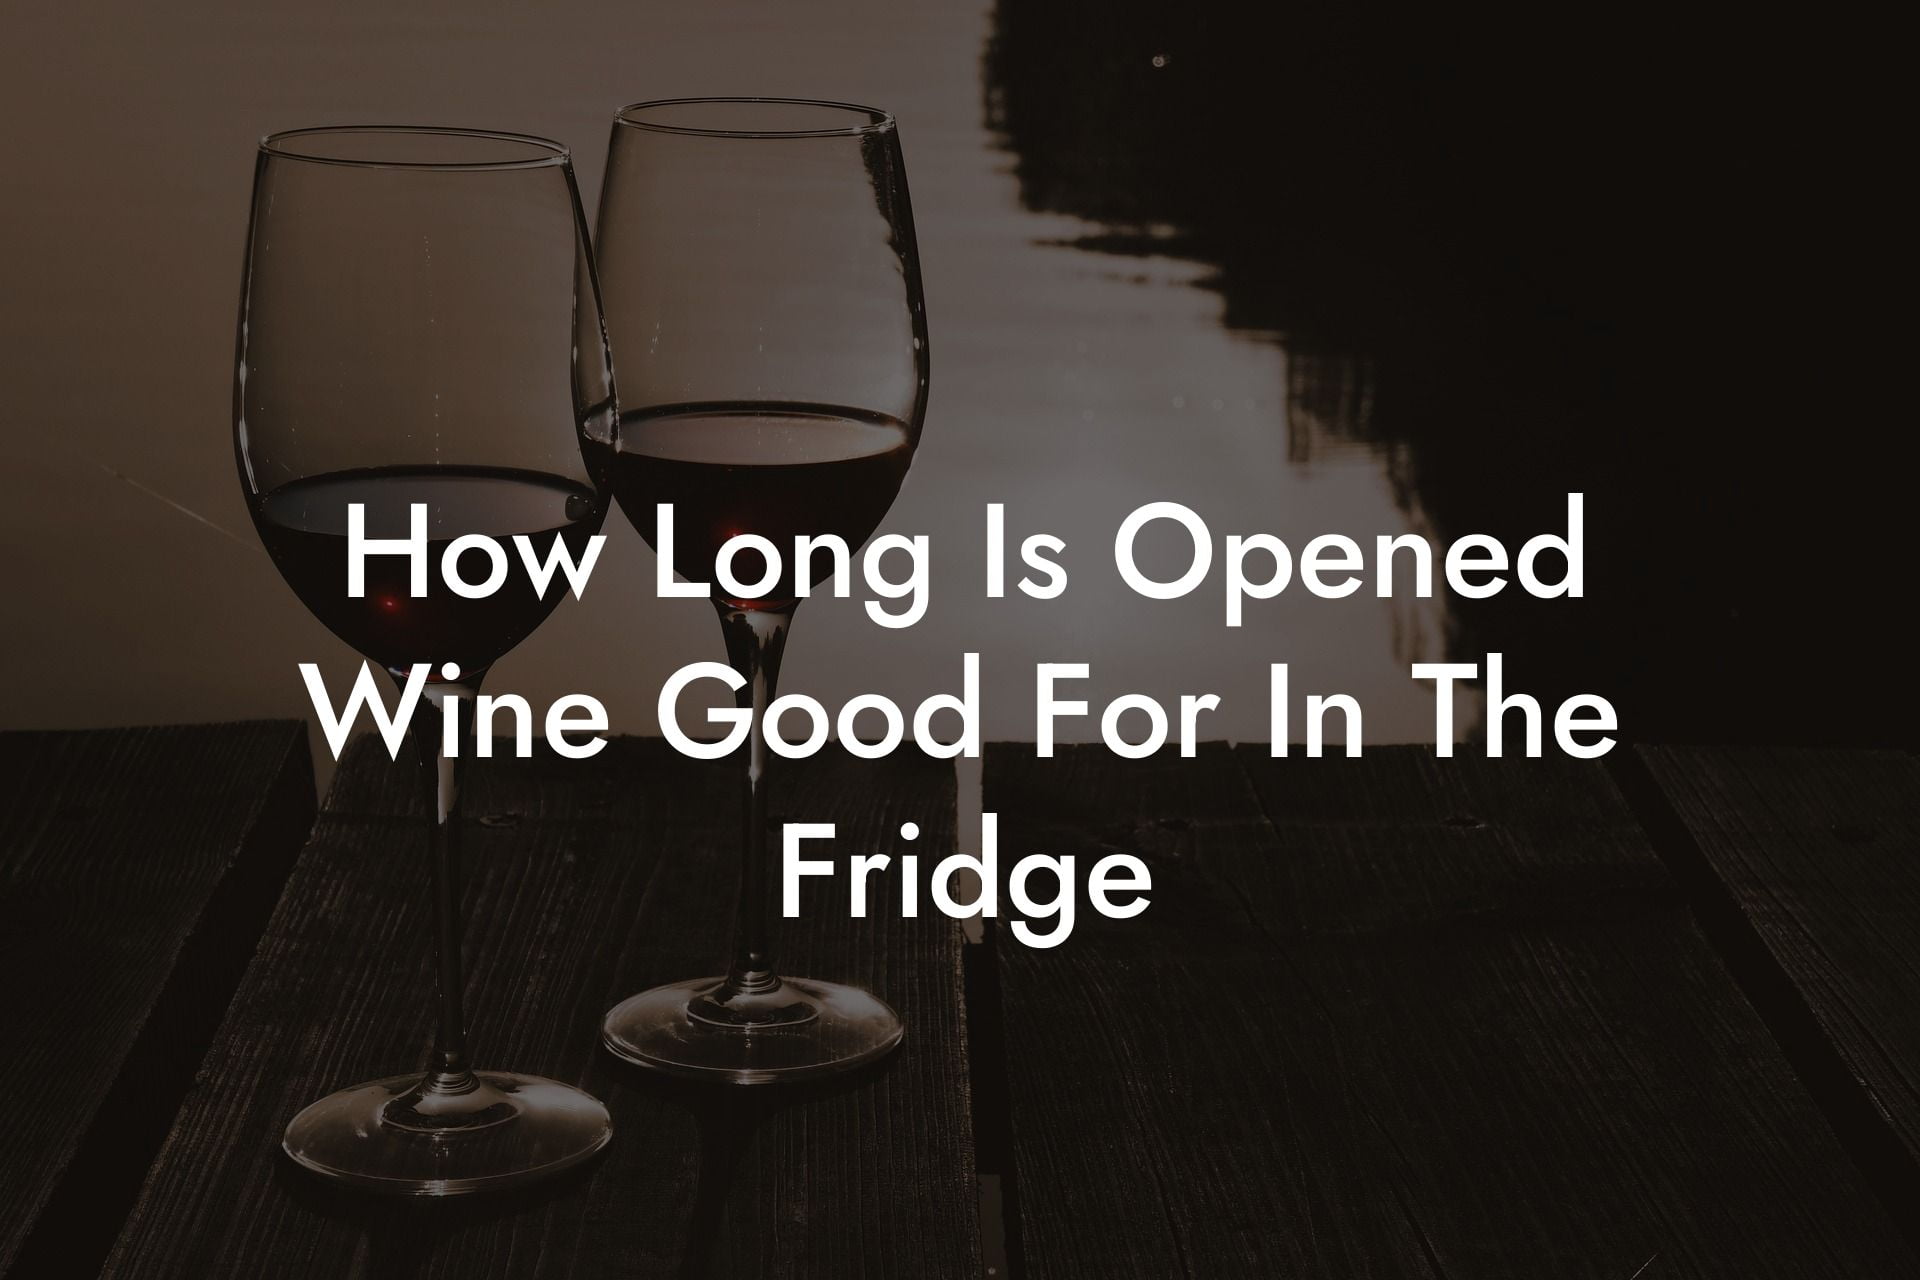 How Long Is Opened Wine Good For In The Fridge